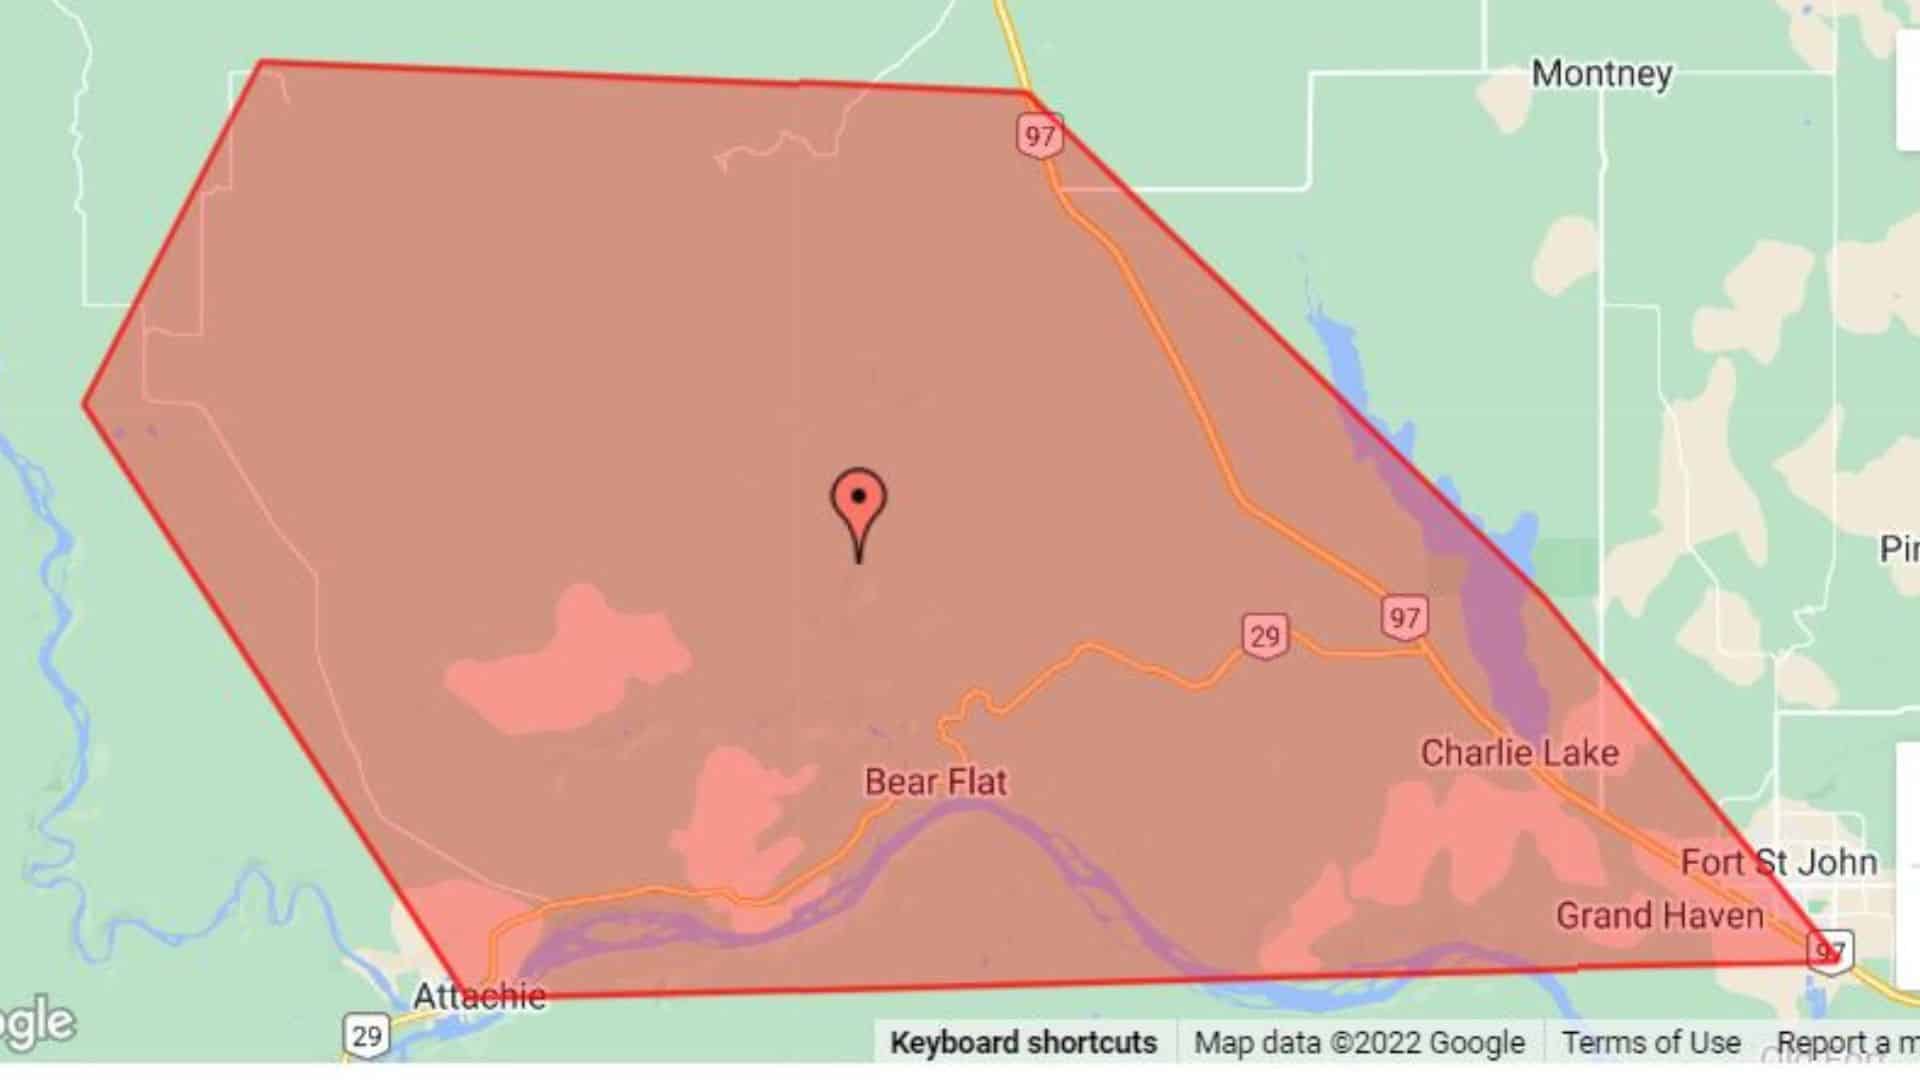 update-bc-hydro-outage-affects-1-701-customers-in-fort-st-john-area